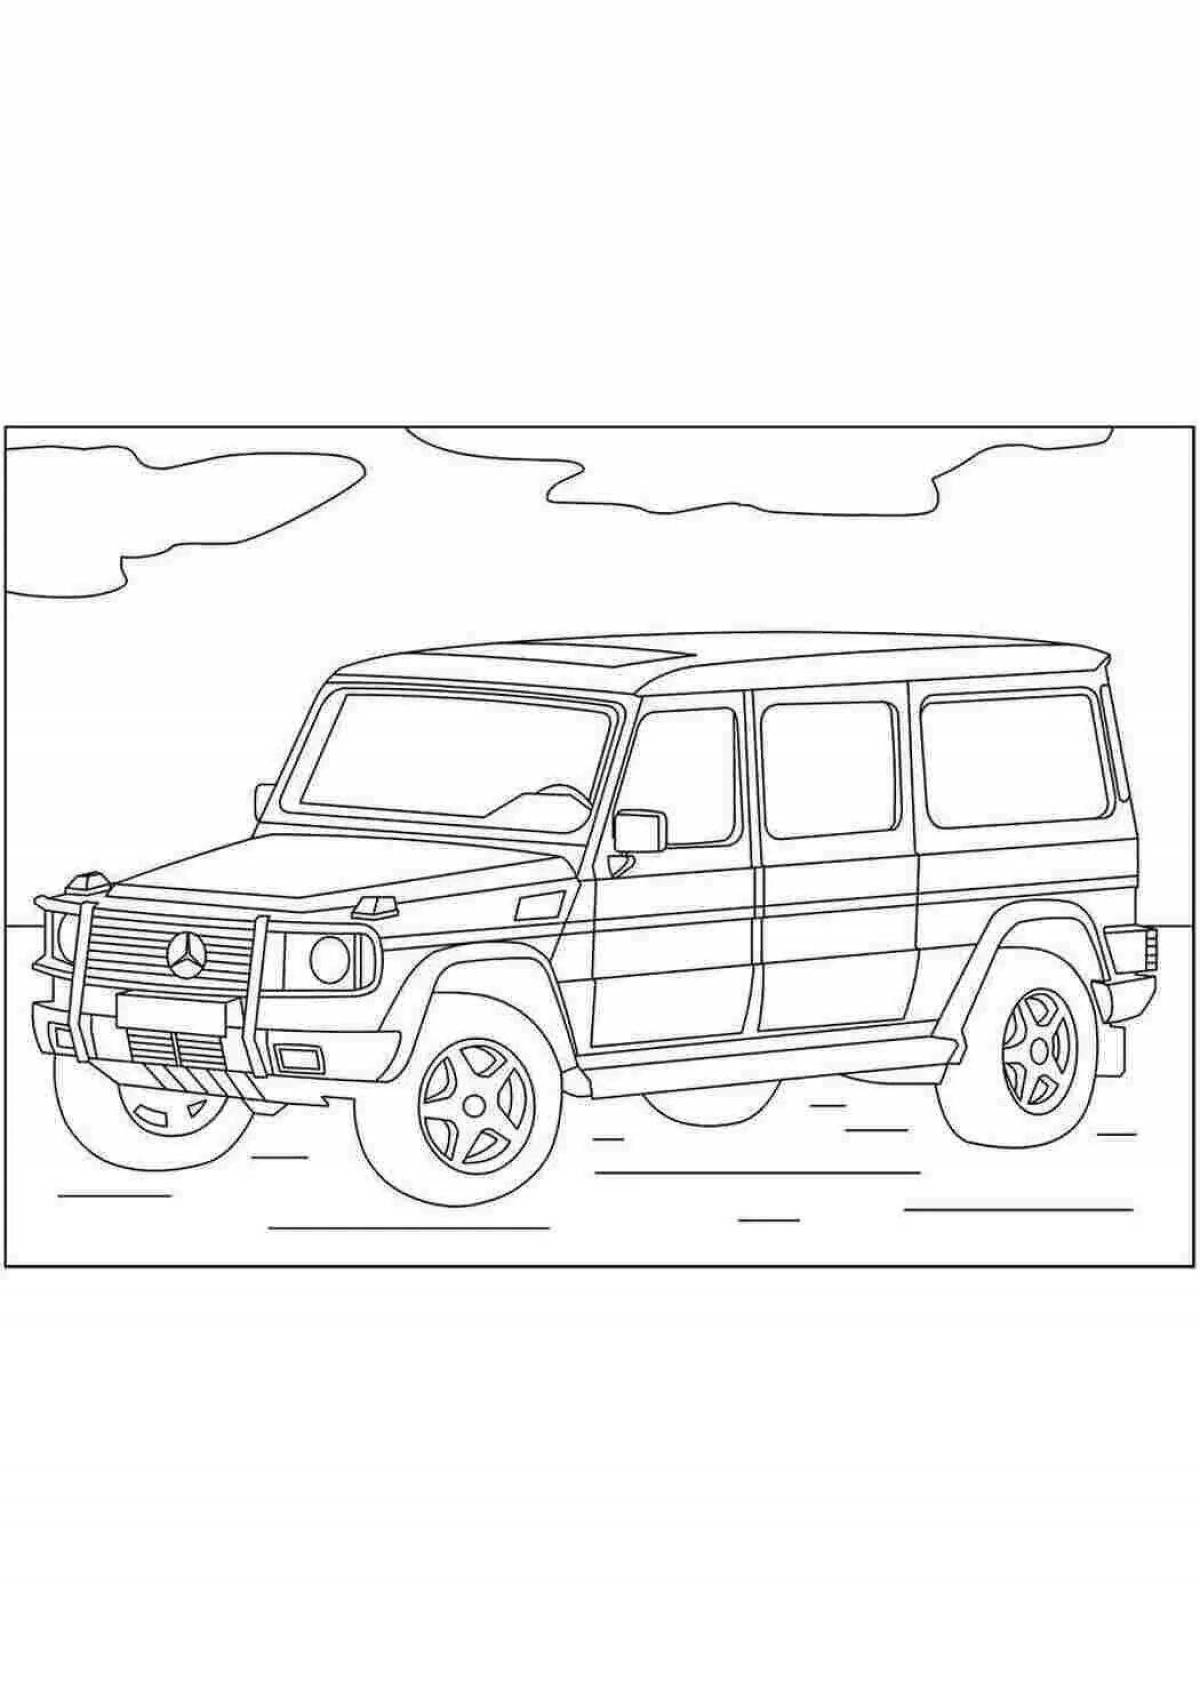 Adorable cars coloring book for 8 year old boys